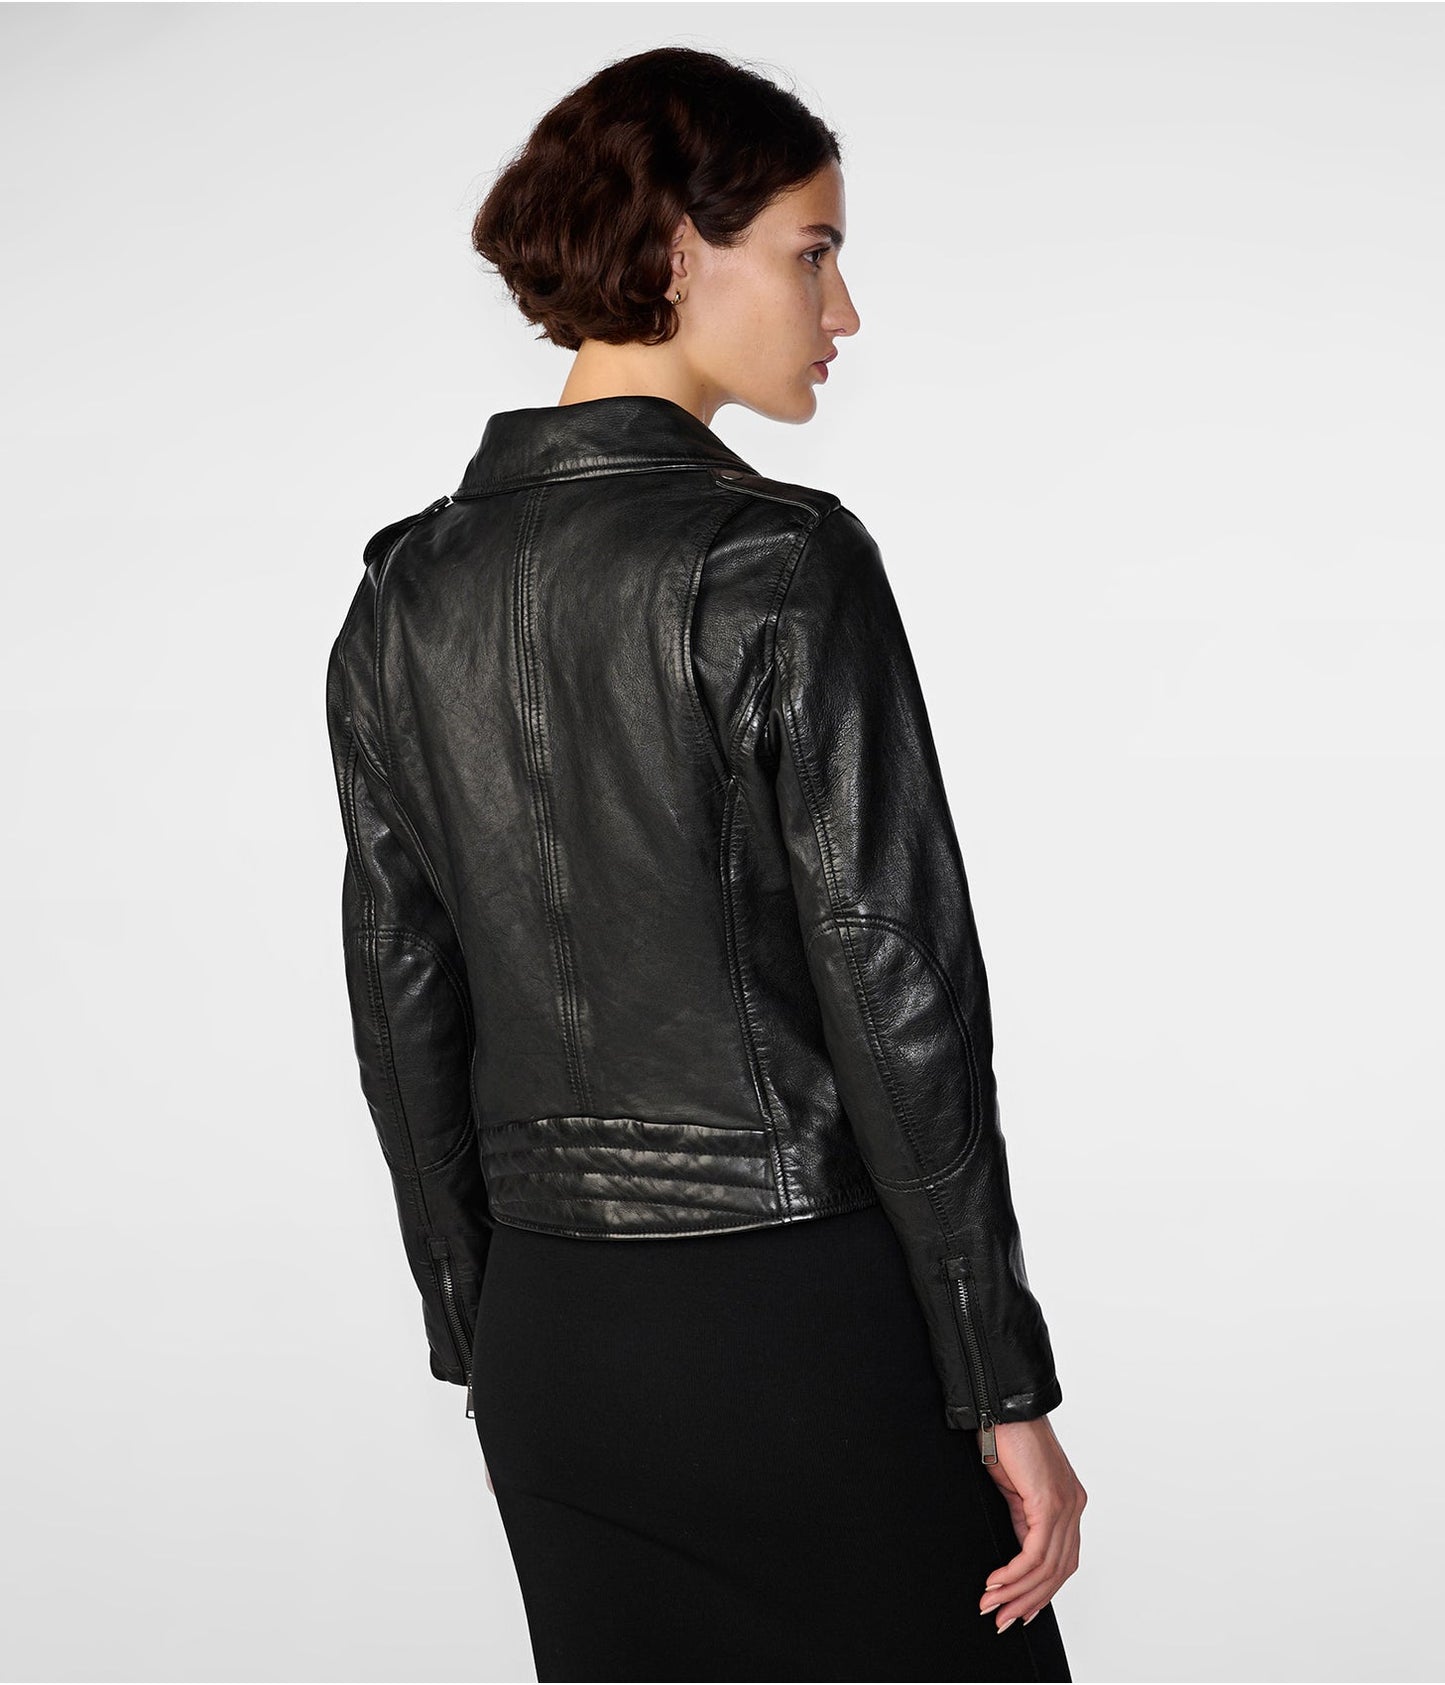 Women's Leather Biker Jacket In Black With Removable Fur Collar